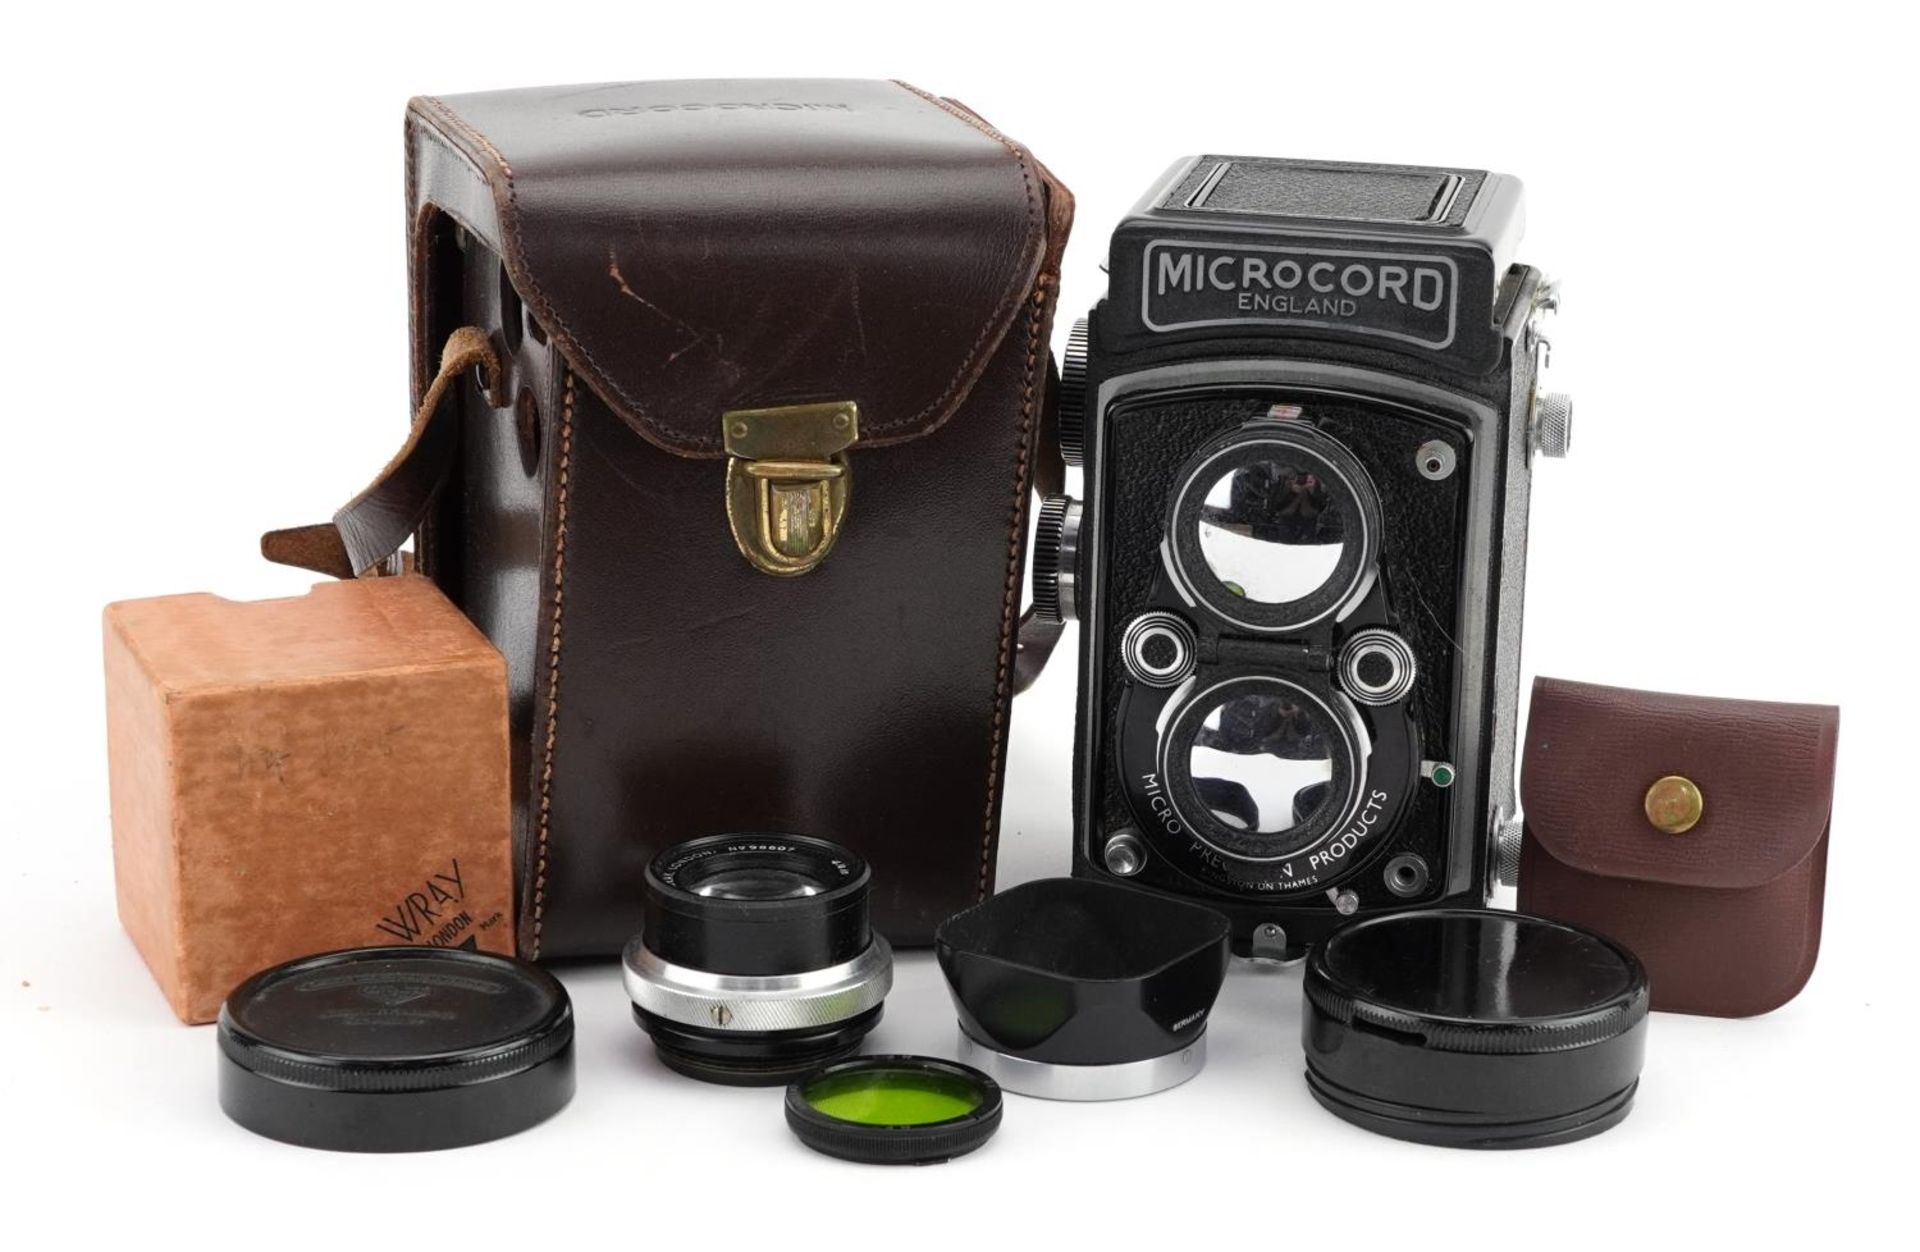 Microcord camera with leather case and Rollei lens cover and Vray of London lens : For further